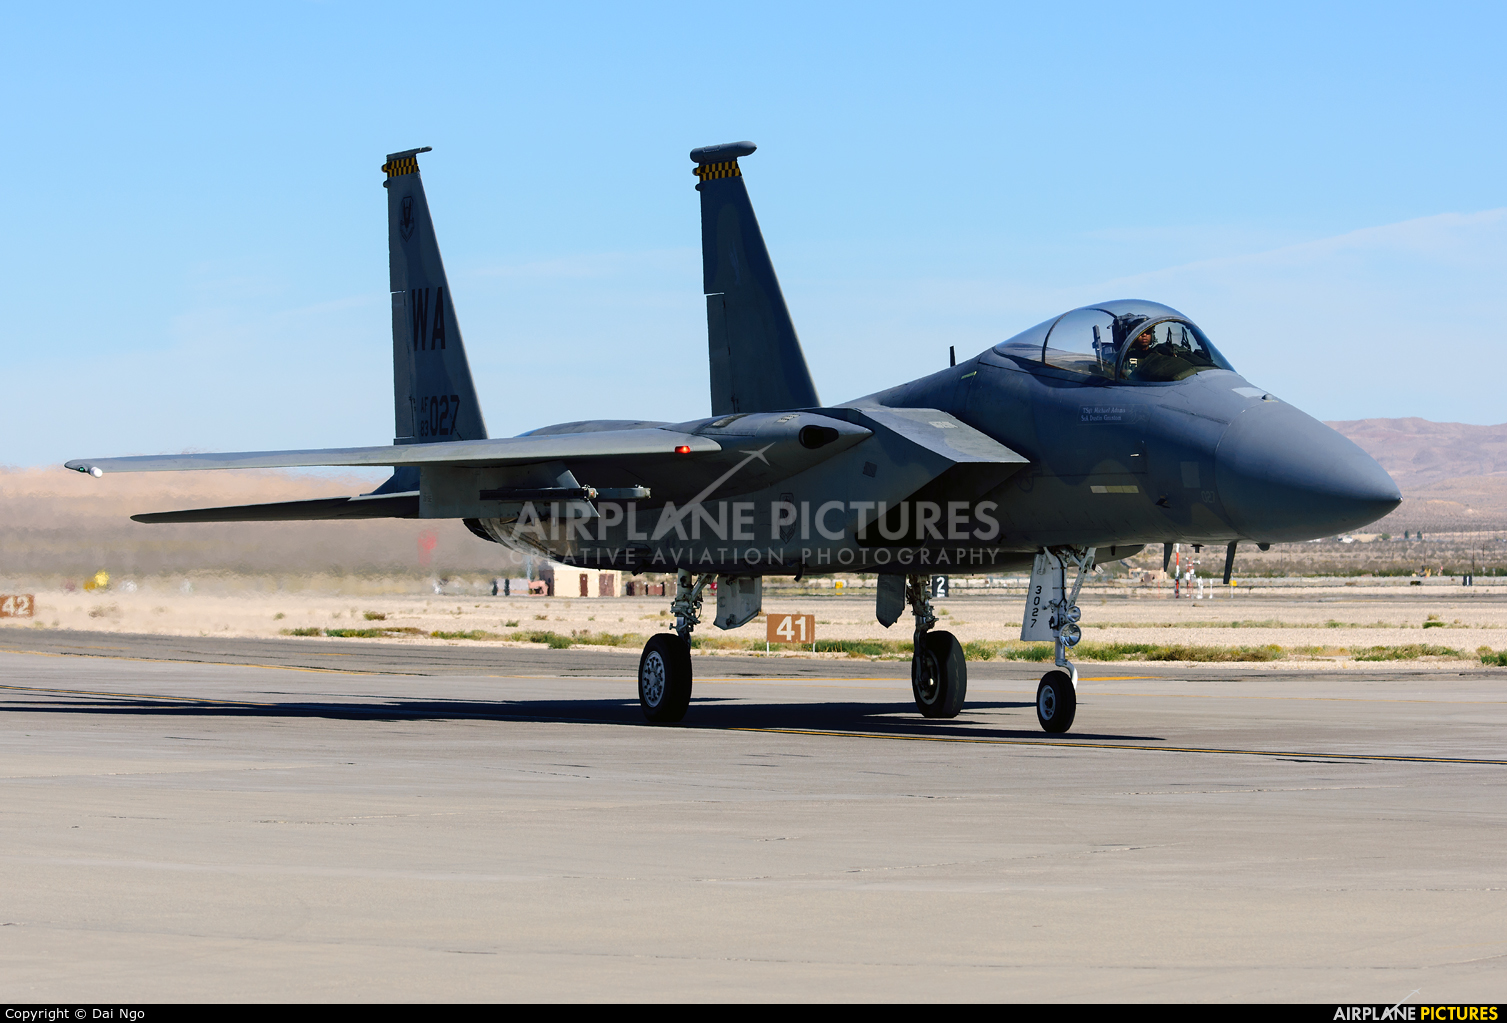 USA - Air Force 83-0027 aircraft at Nellis AFB